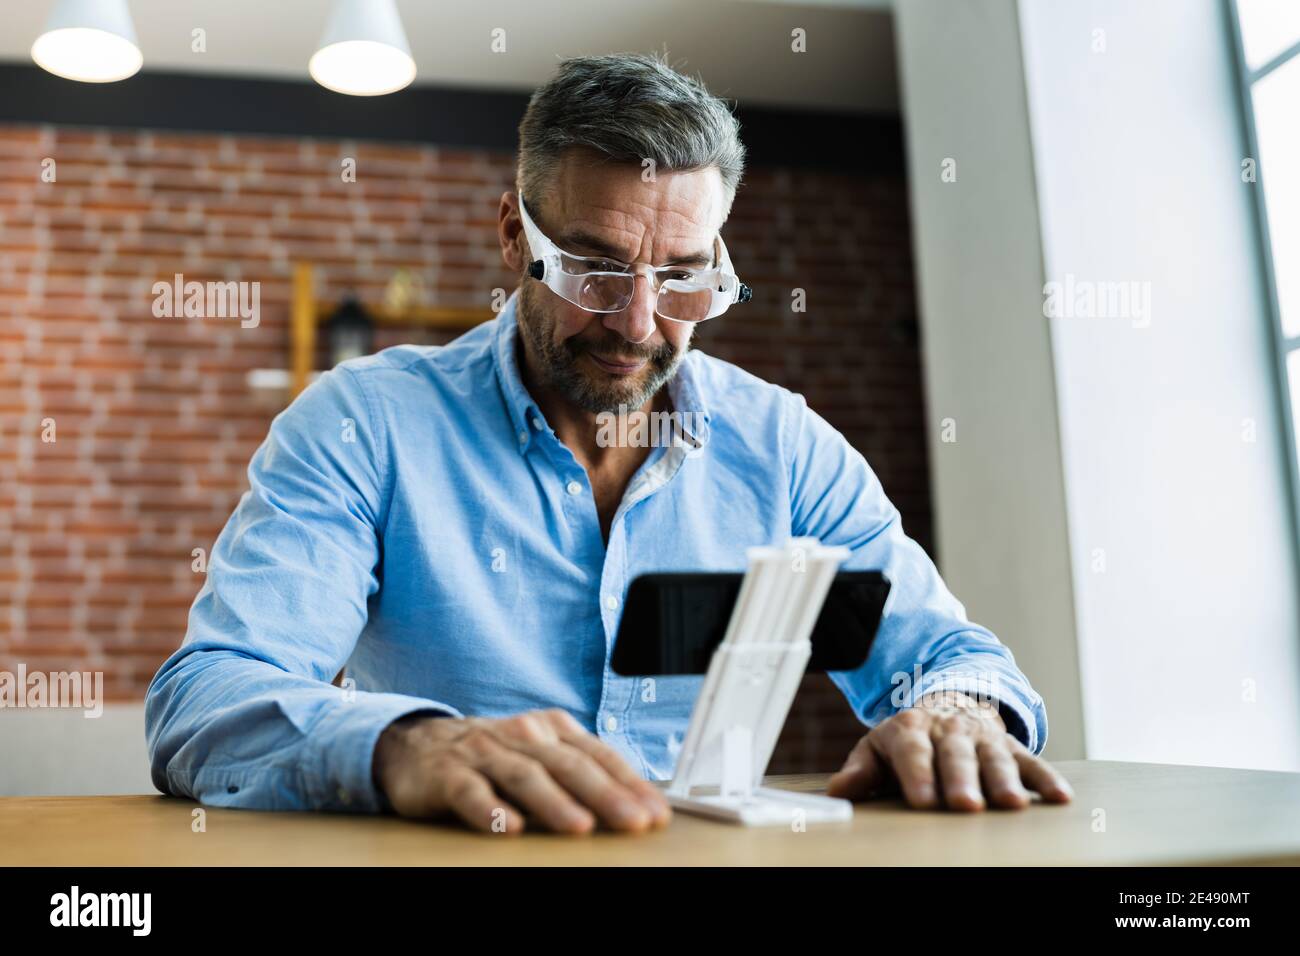 Mature Man Using Magnifying Glasses For Reading Text On Smartphone Stock Photo